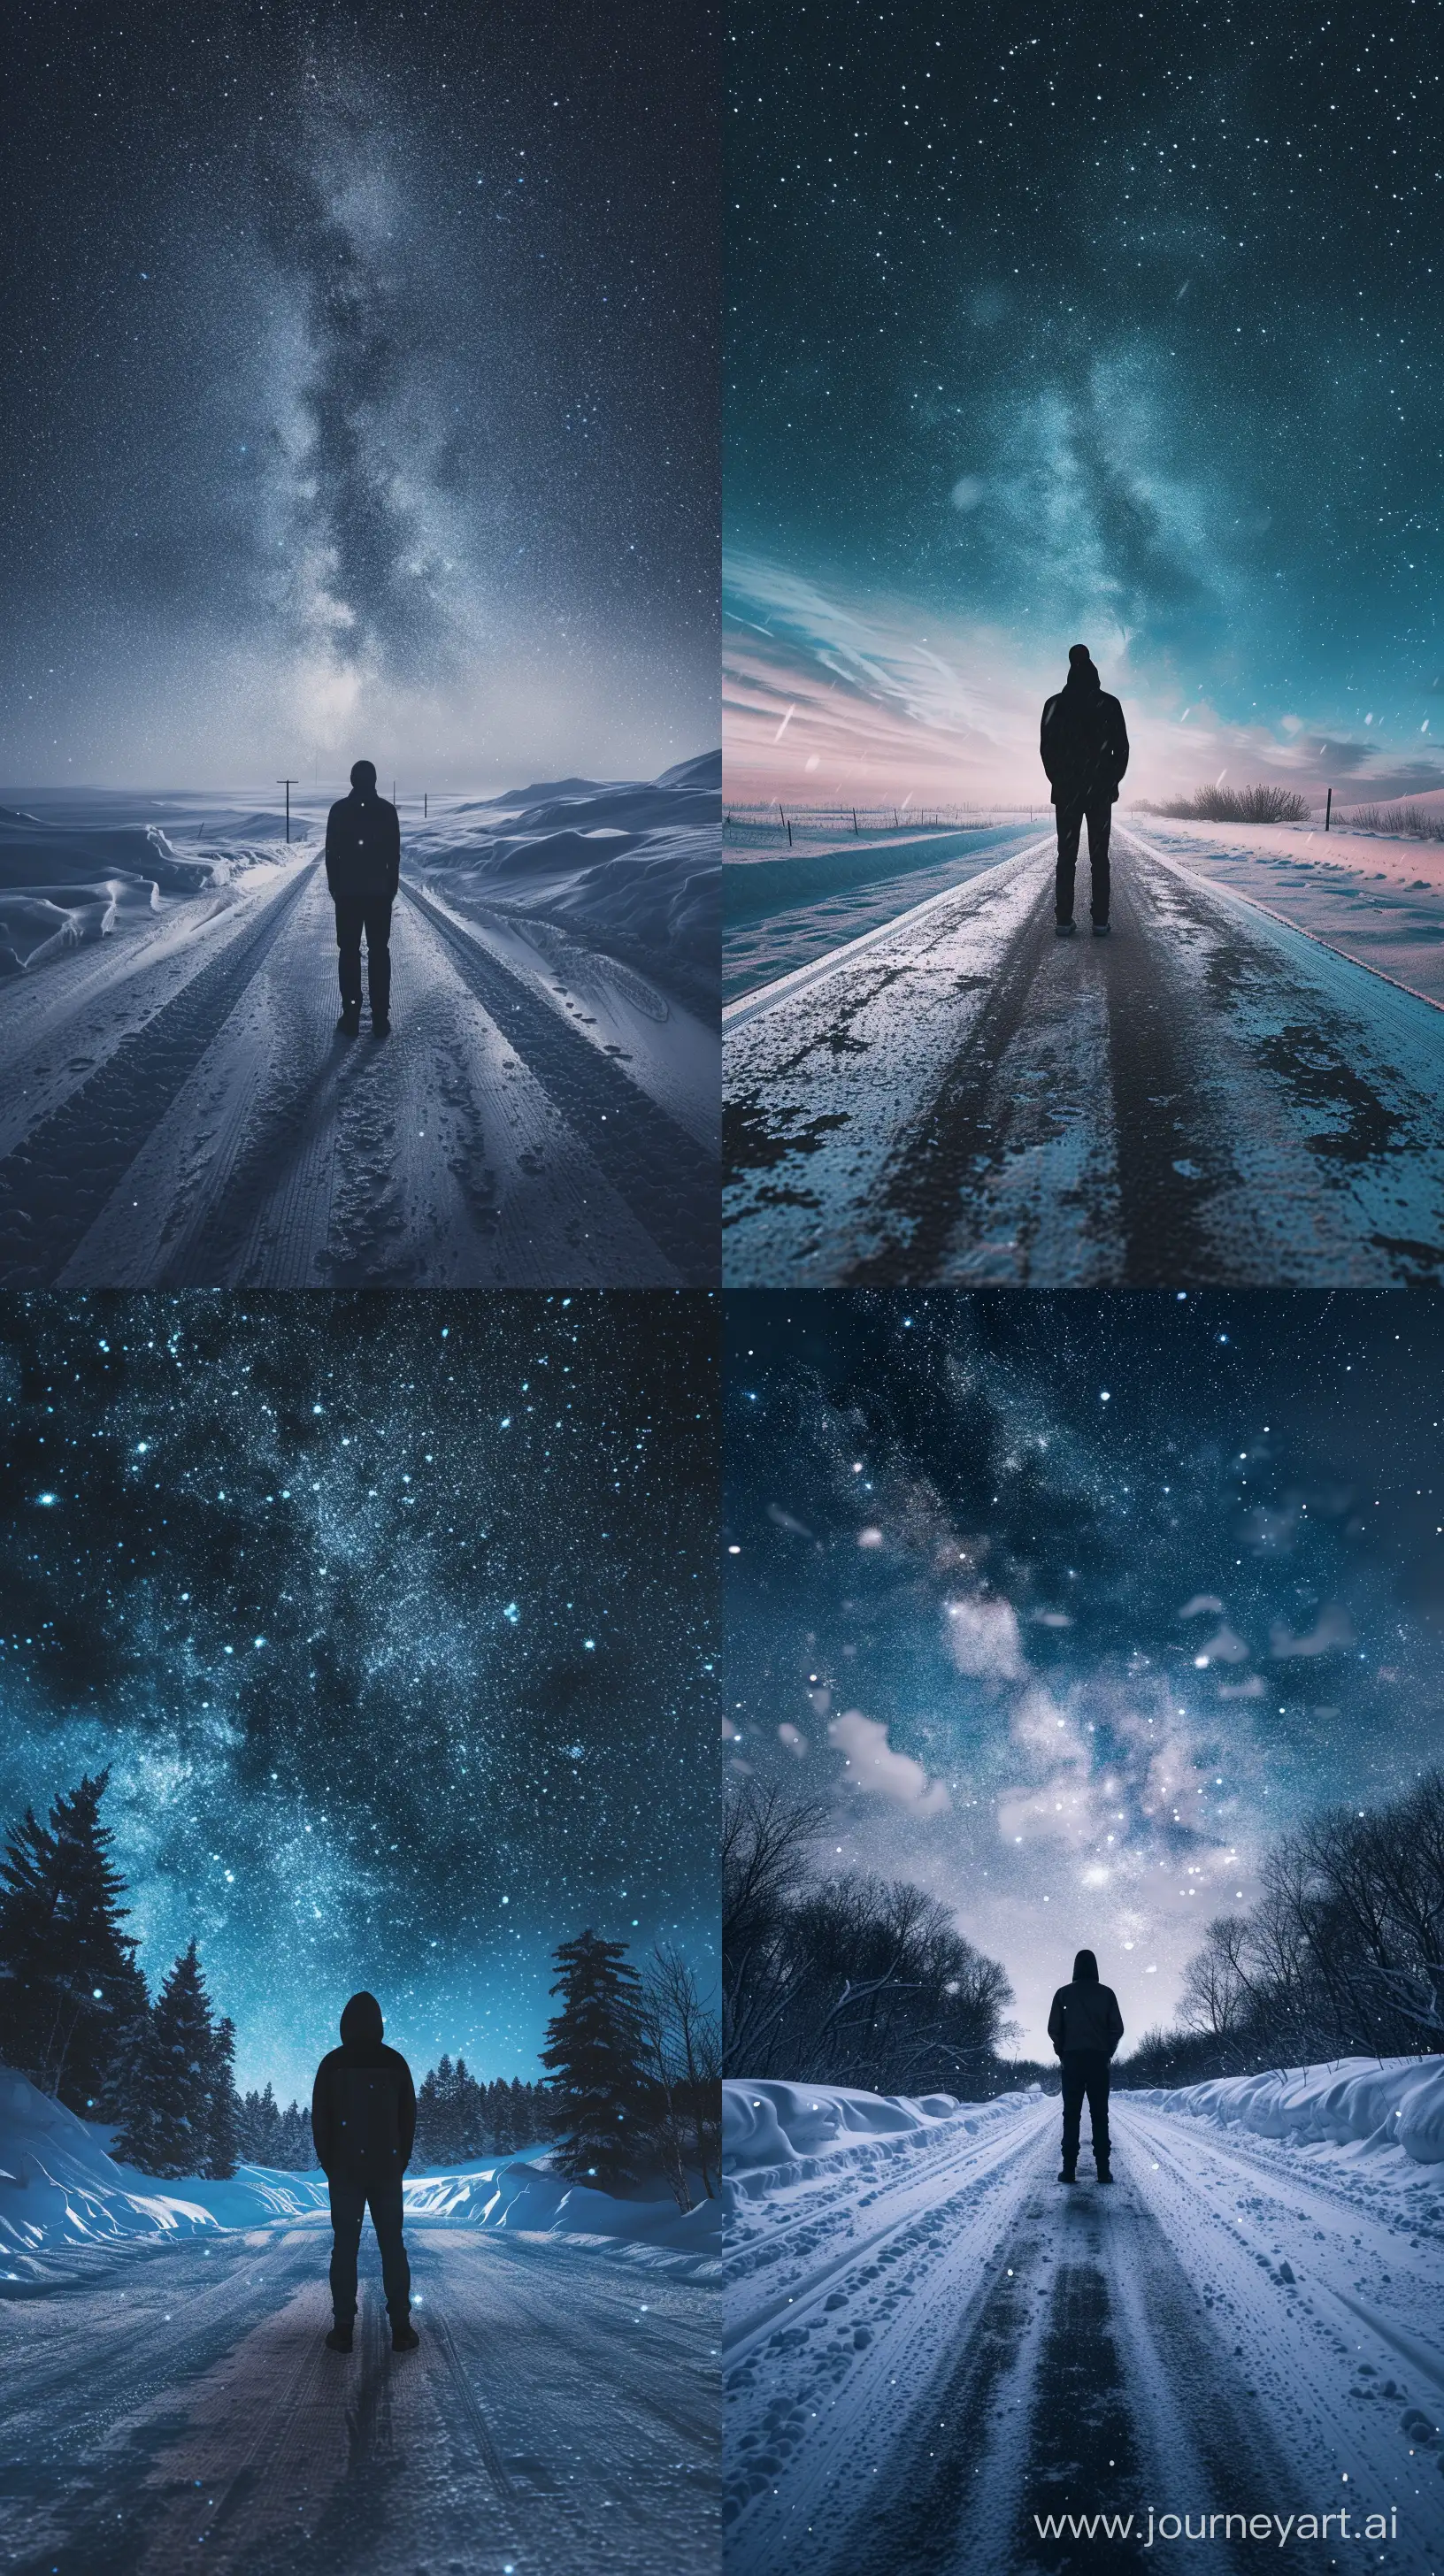 Cold-Winter-Night-Lone-Figure-on-Snowy-Road-under-Starry-Sky